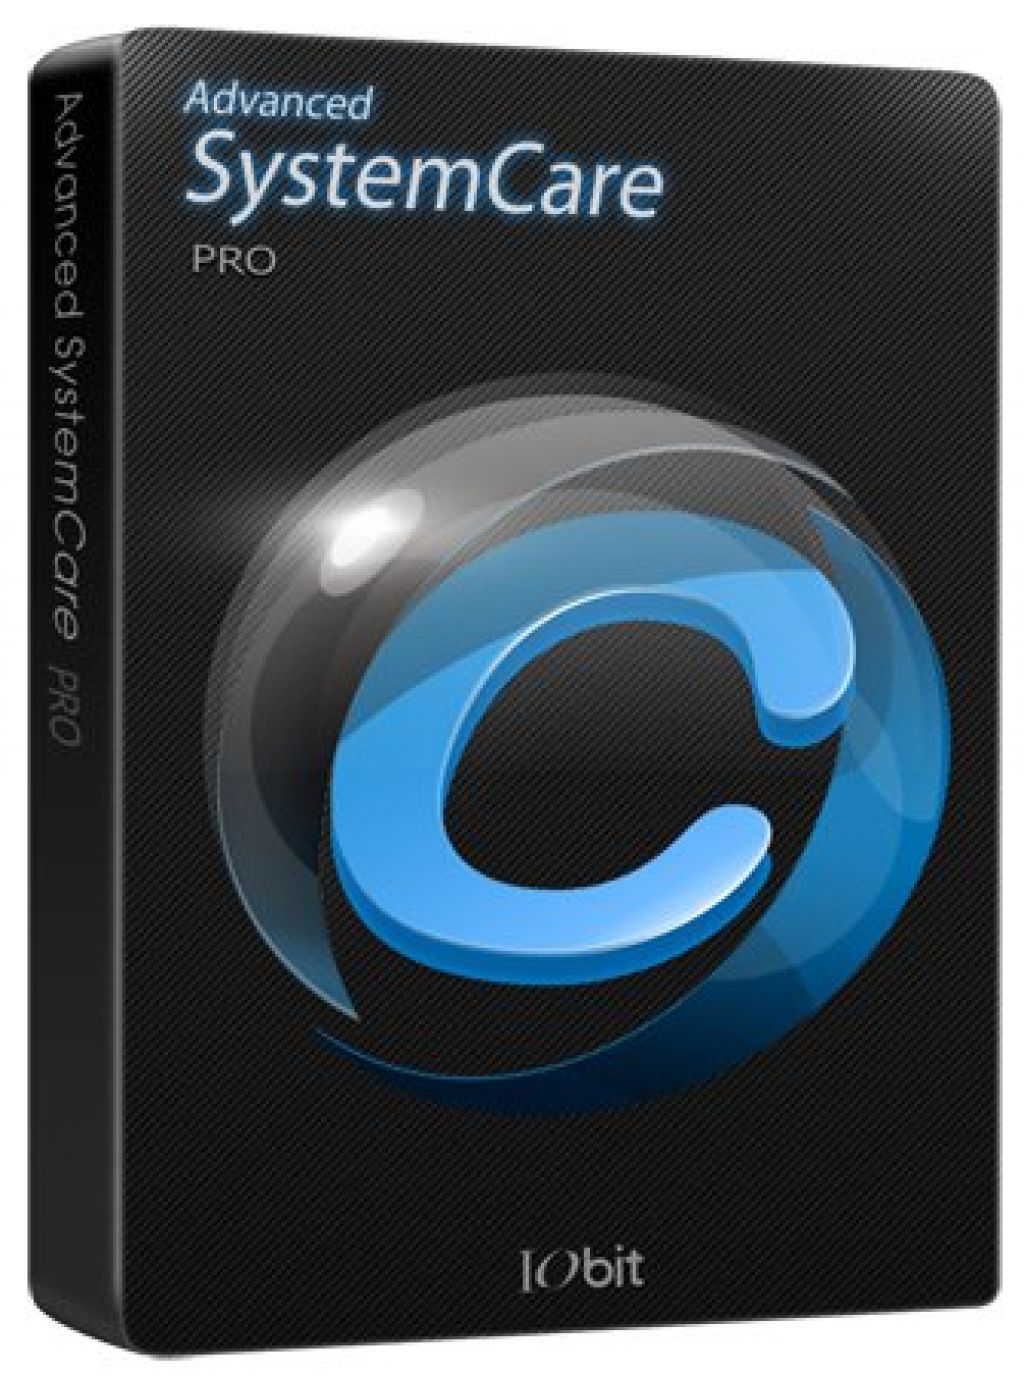 for android instal Advanced SystemCare Pro 16.4.0.226 + Ultimate 16.1.0.16